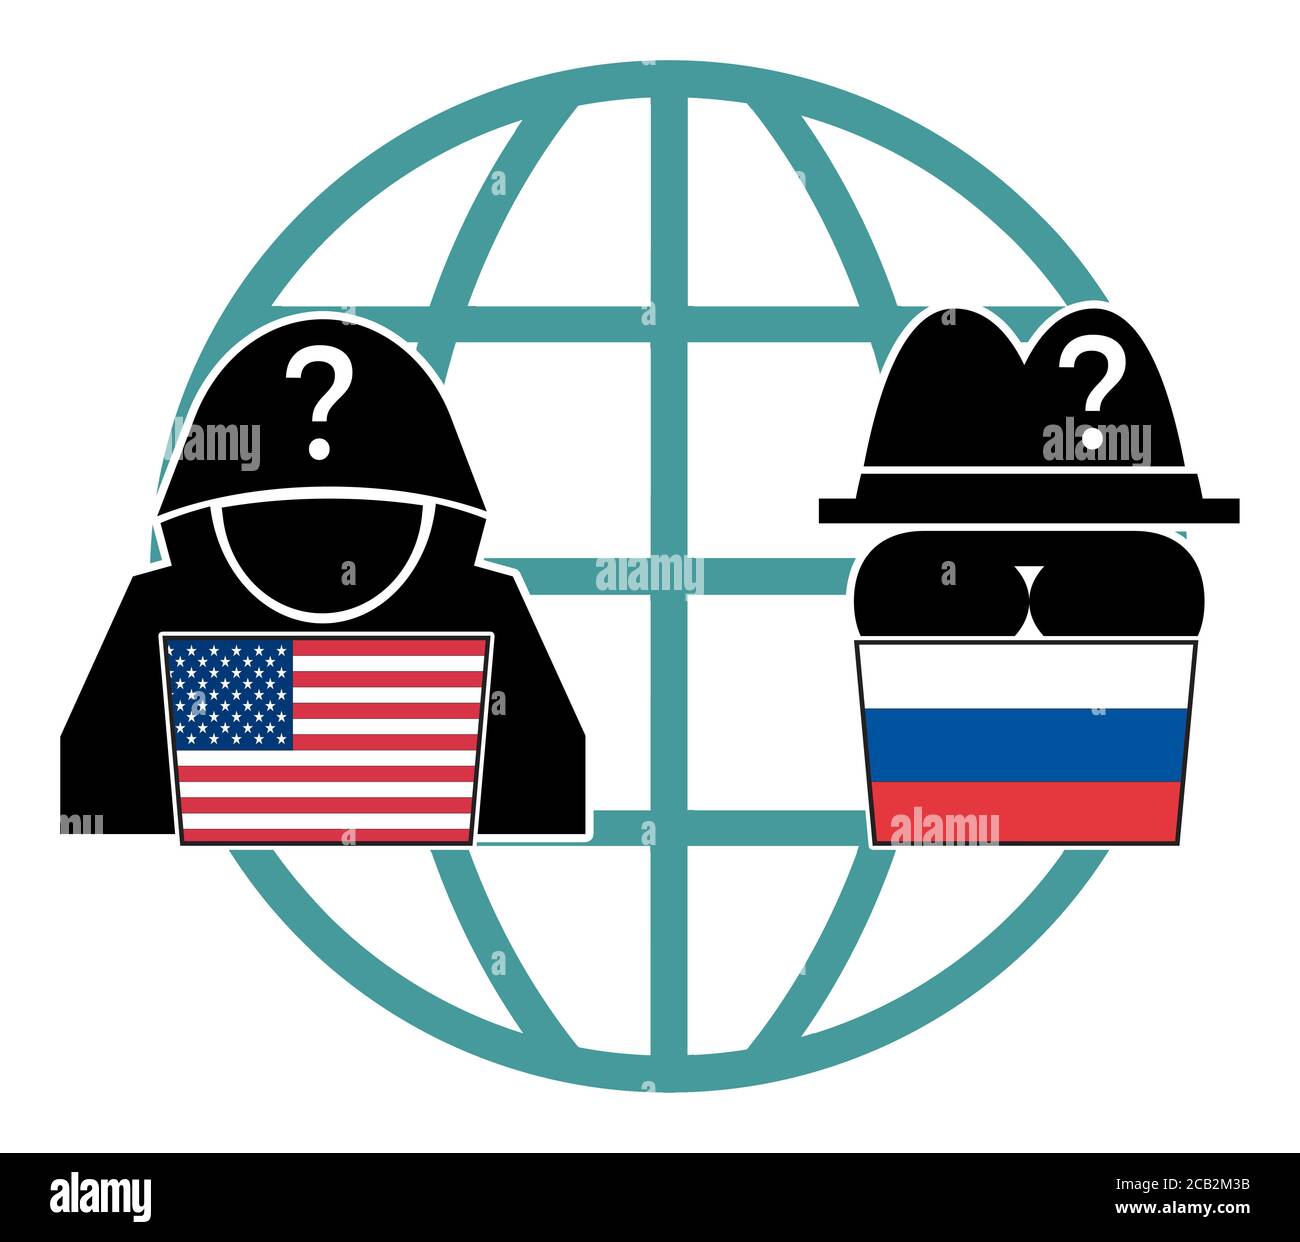 USA and Russia in competition on spying political and economic secrets. Stock Photo